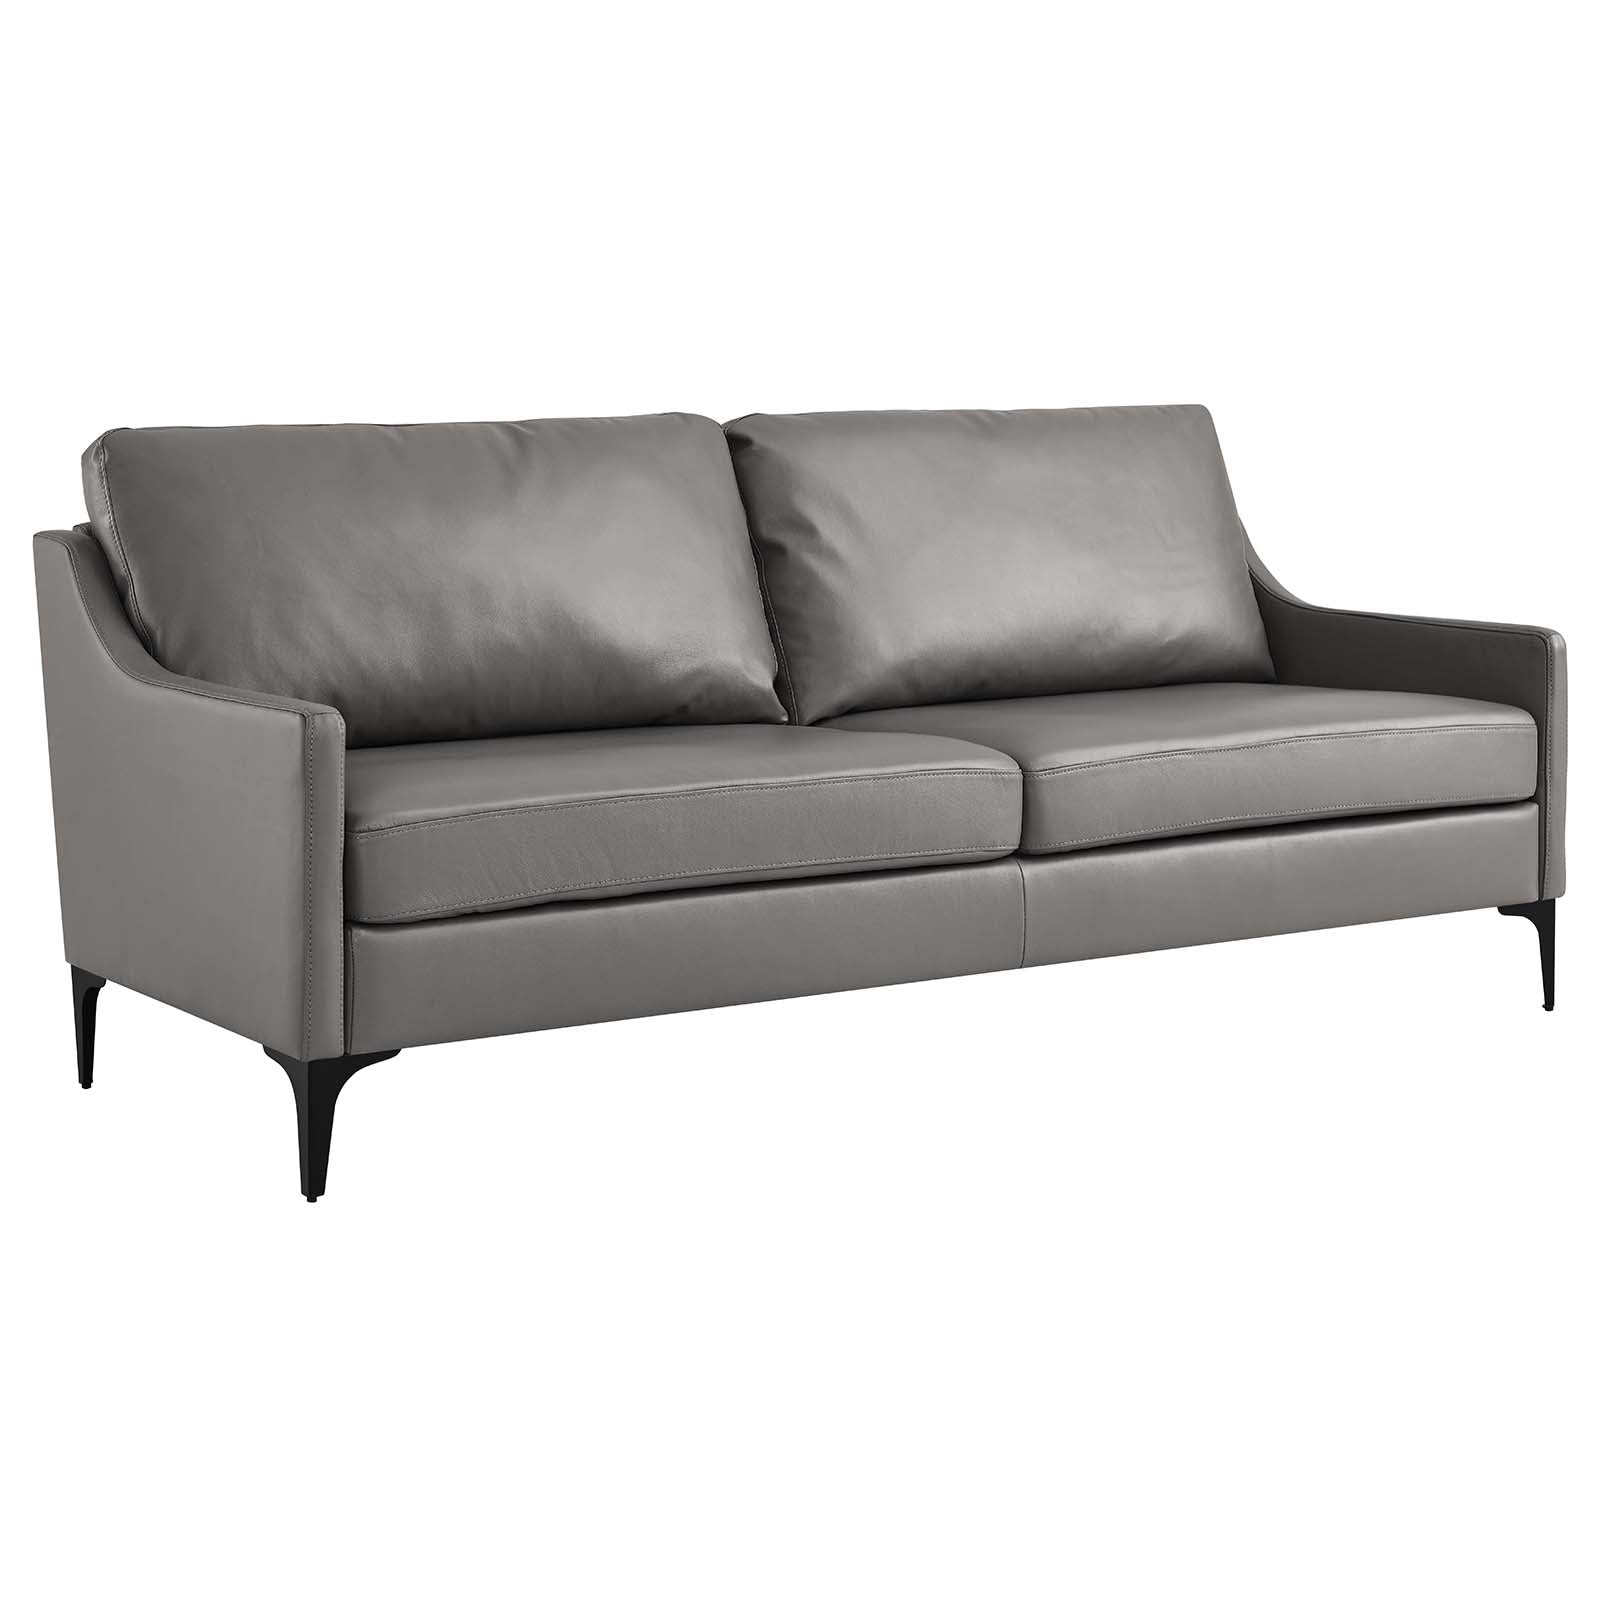 Modway Sofas & Couches - Corland Leather Sofa Gray